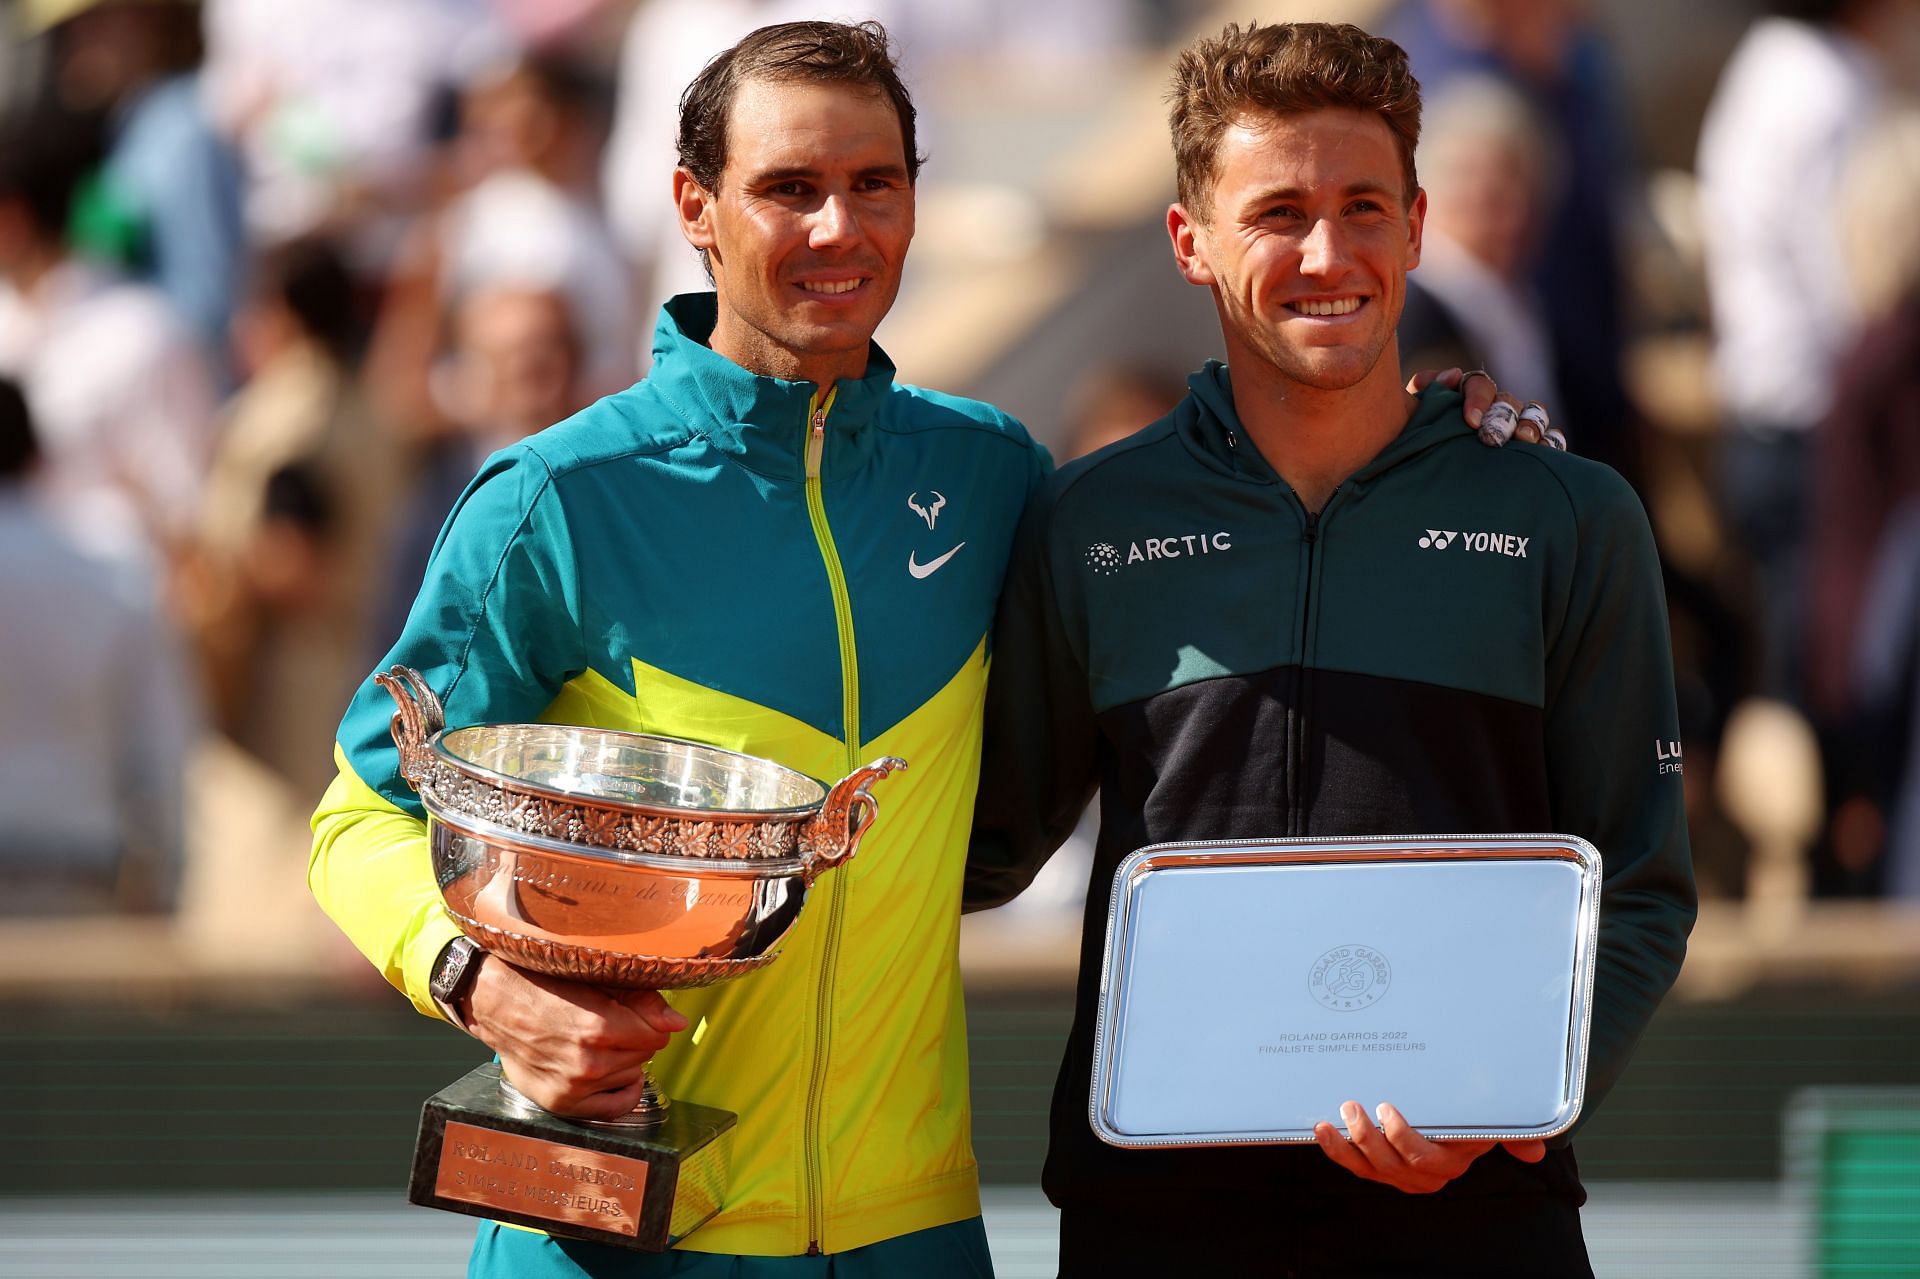 Rafael Nadal won the 2022 French Open, Casper Ruud was the runner-up